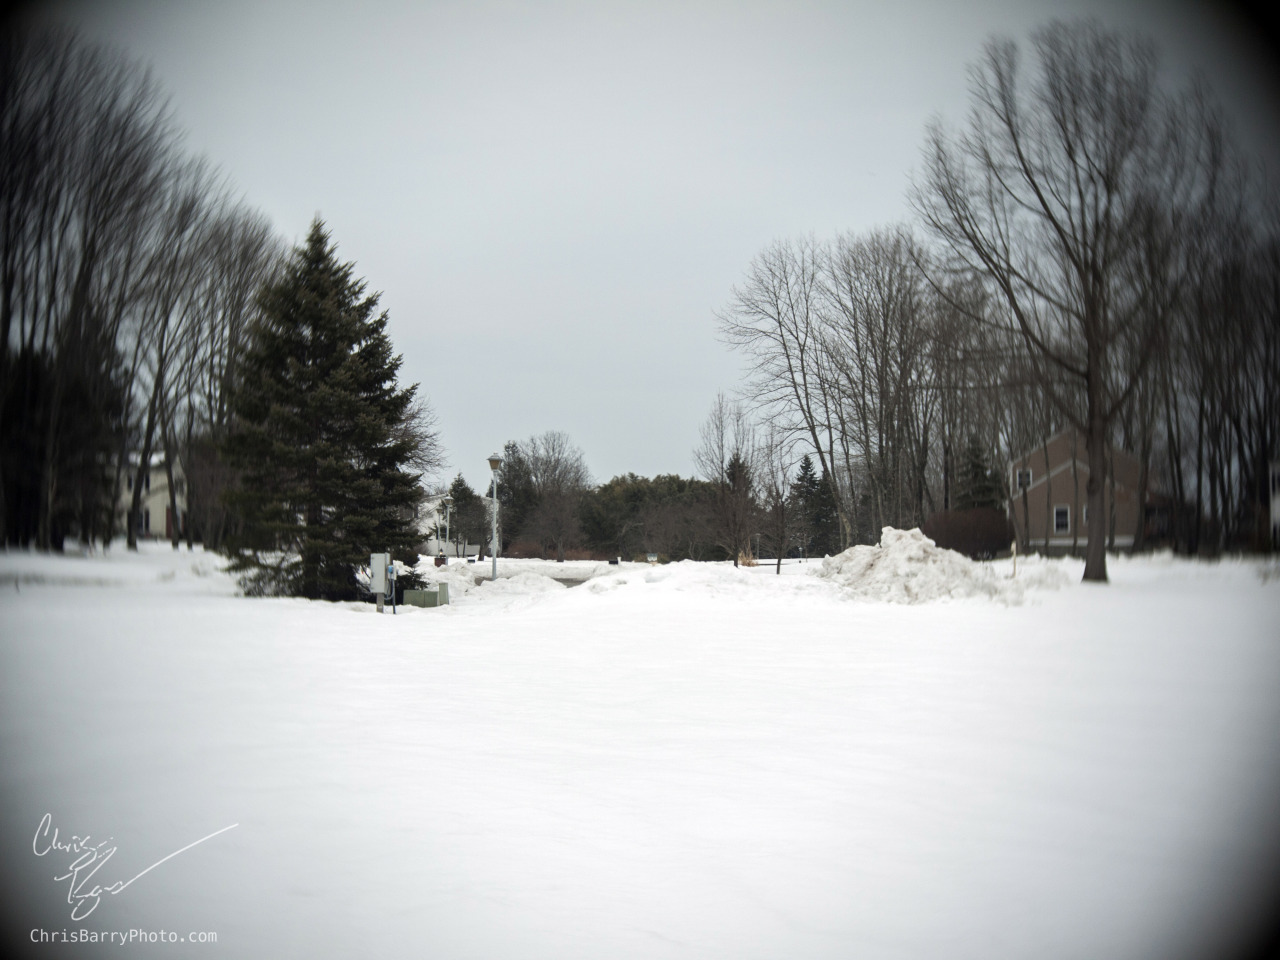 Not the best landscape lens, but the vignetting (if I can spell it) is kind of nice, I guess